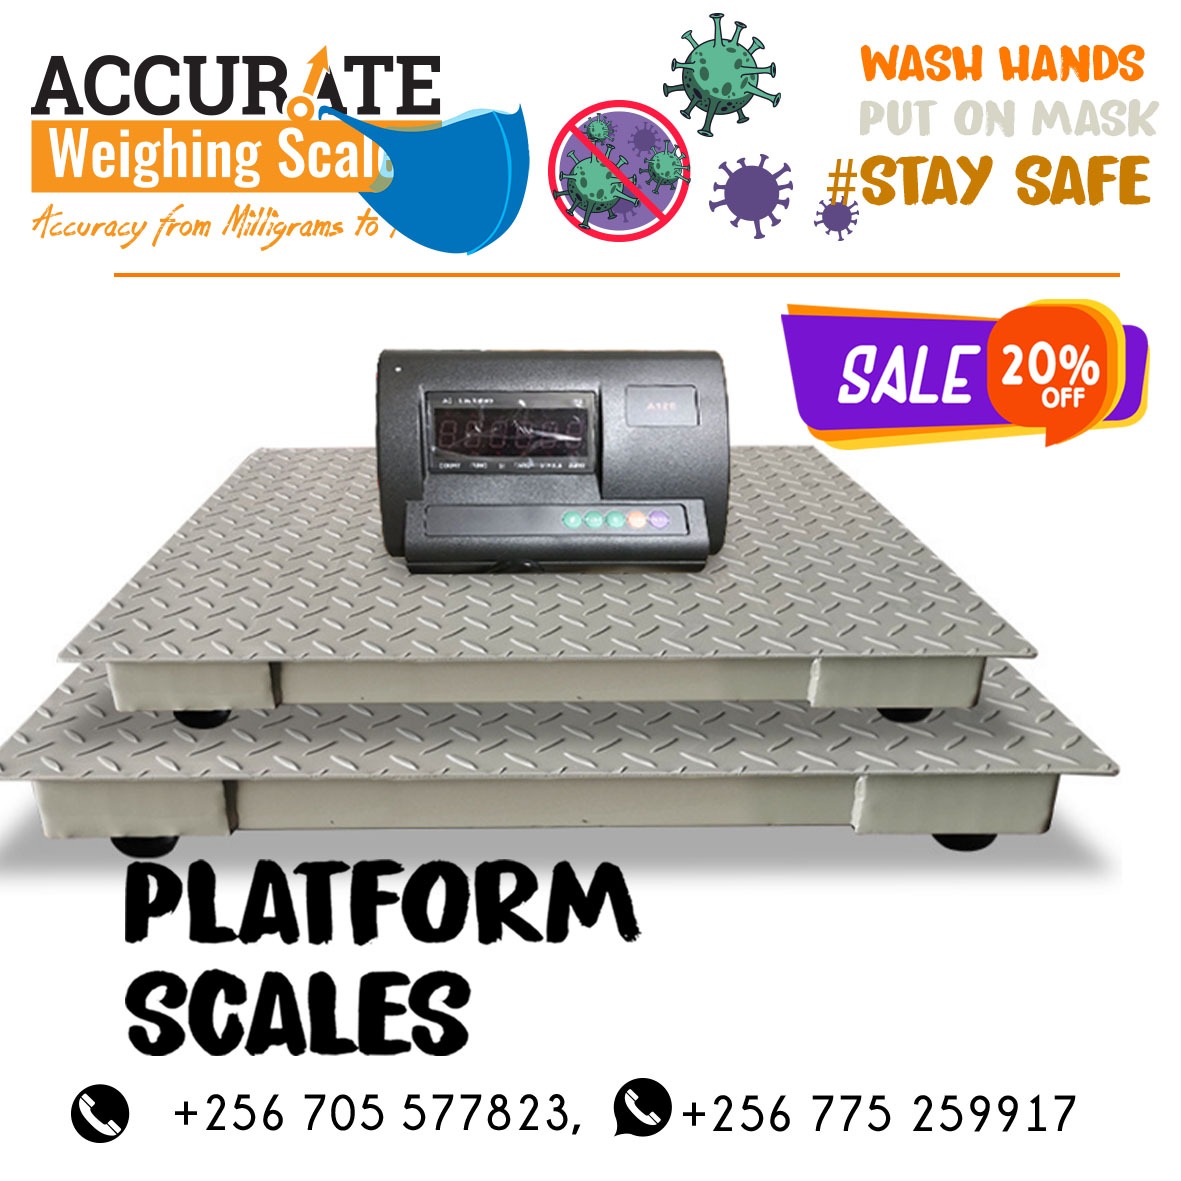 +256 775259917 digital factory scale measuring supplies at low prices at wholesale